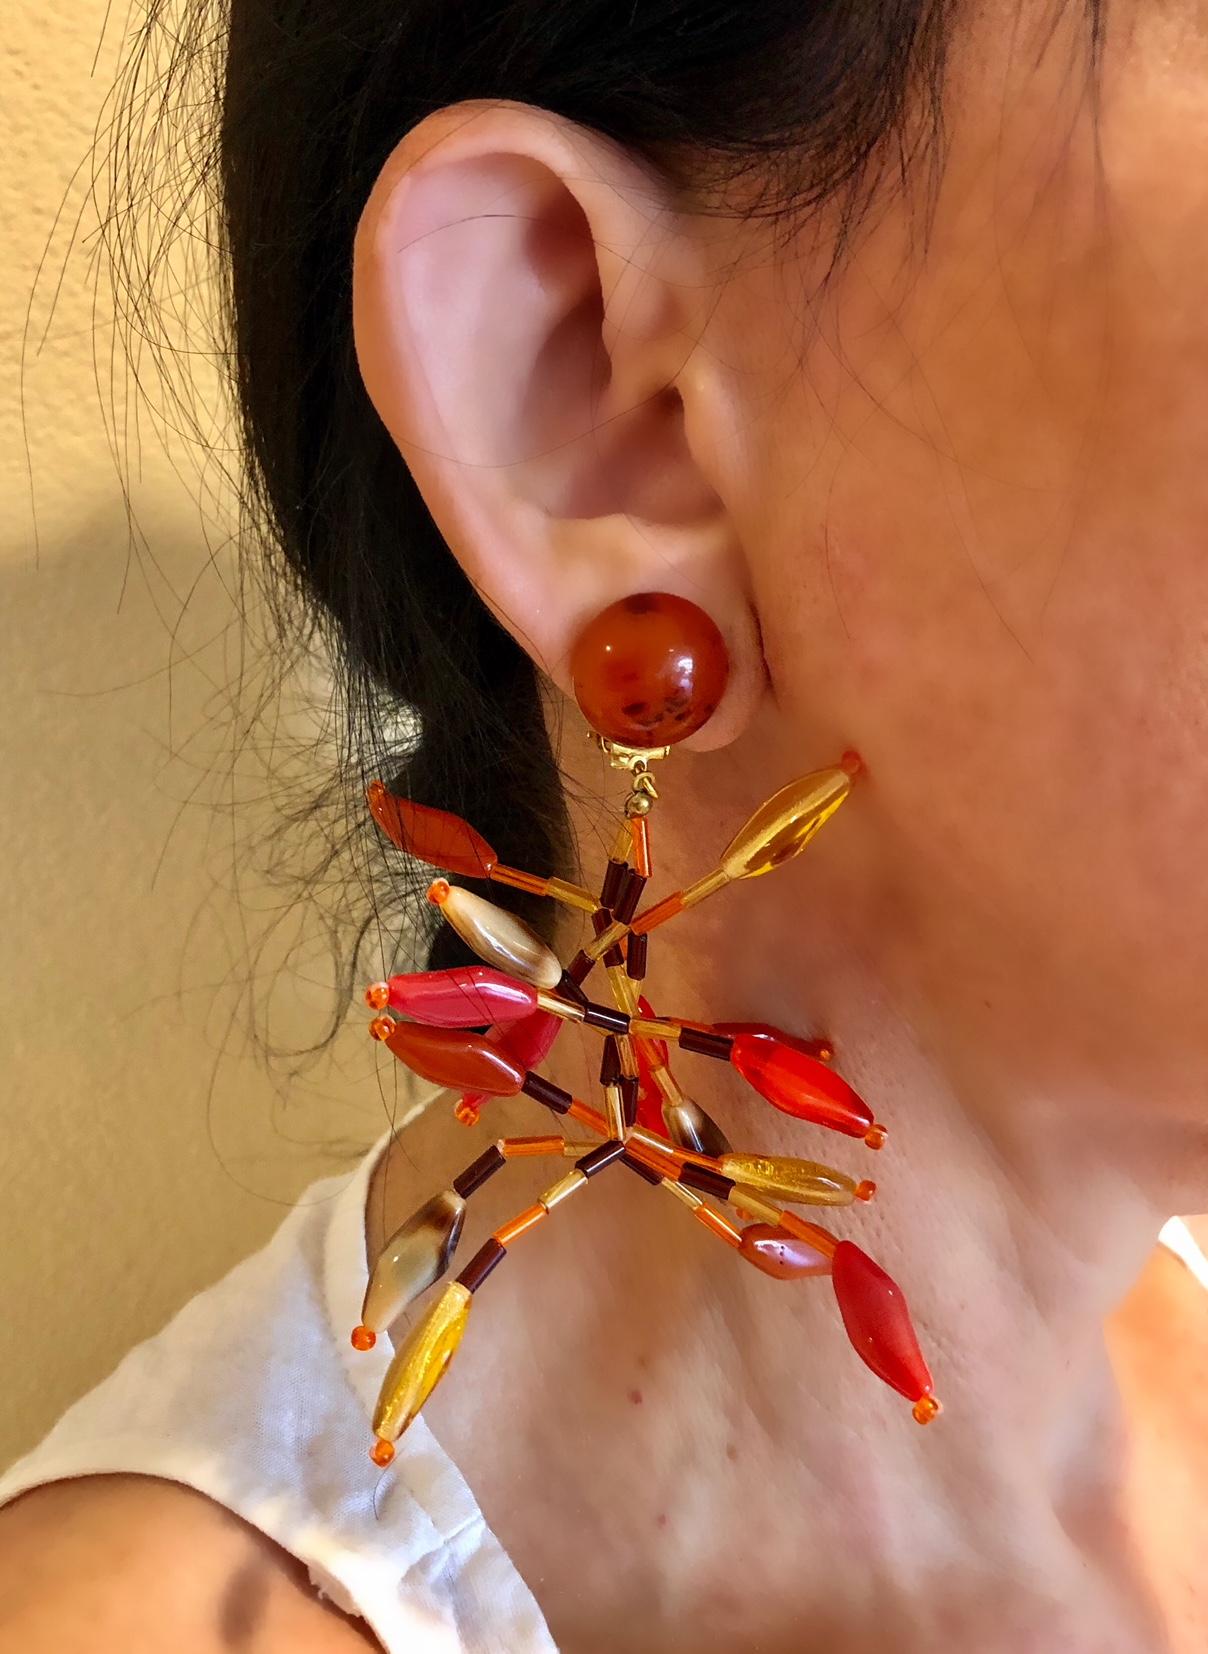 This unique handcrafted pair of chandelier clip-on earrings has a definite wow factor, comprised of a plethora of German glass beads in hues of orange, brown and yellow and are accented by a large bakelite domed button on top. The earrings